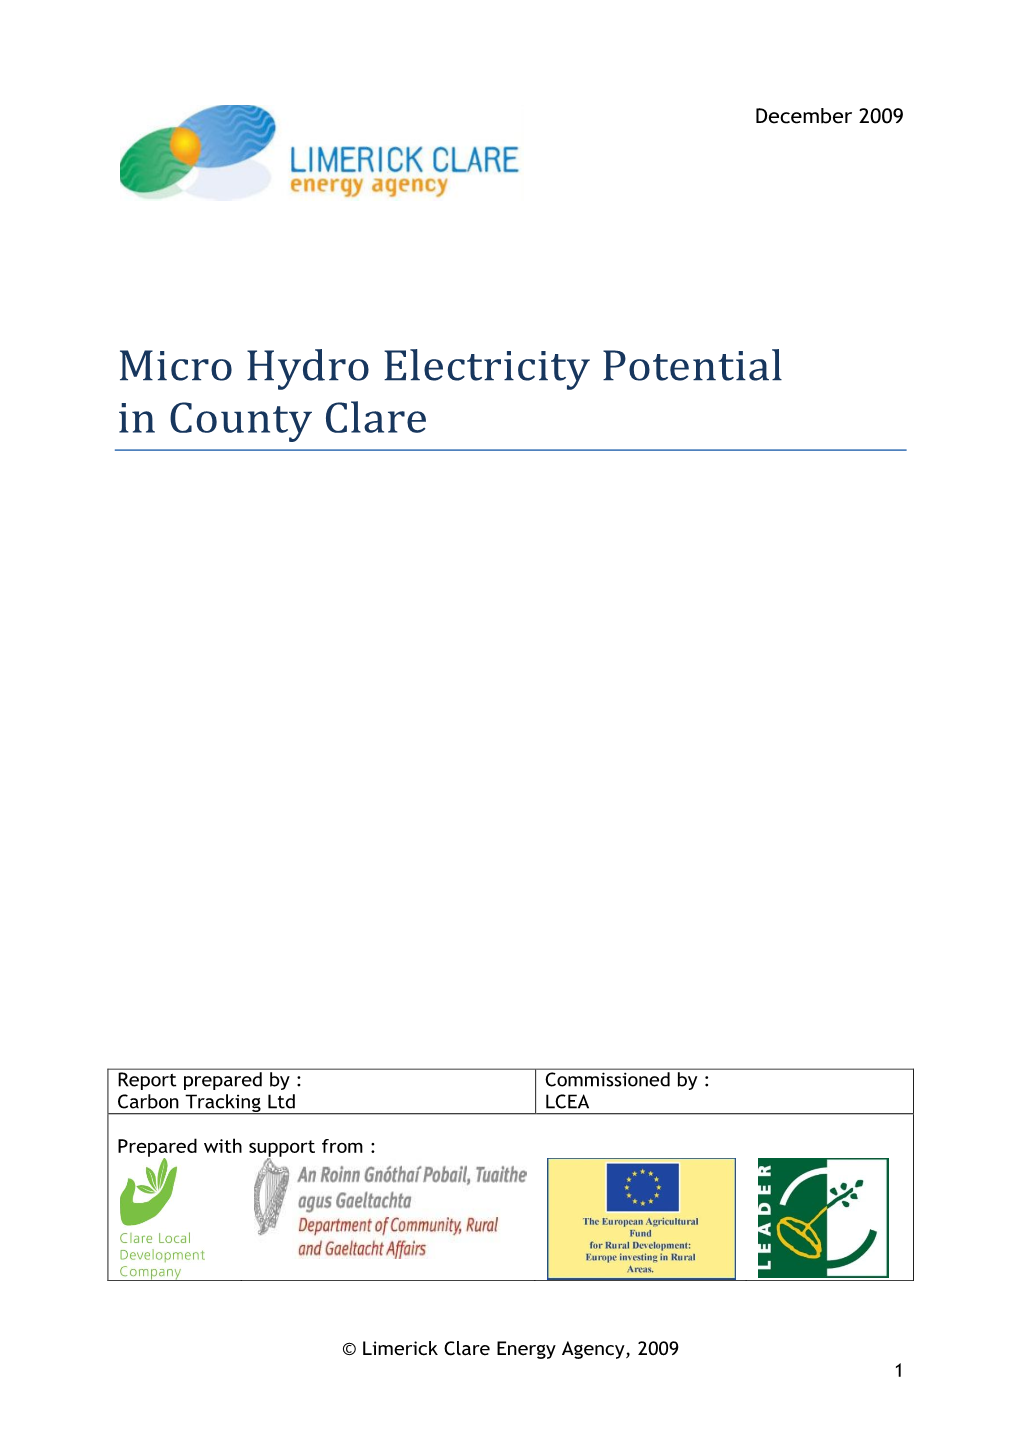 Micro Hydro Electricity Potential in County Clare